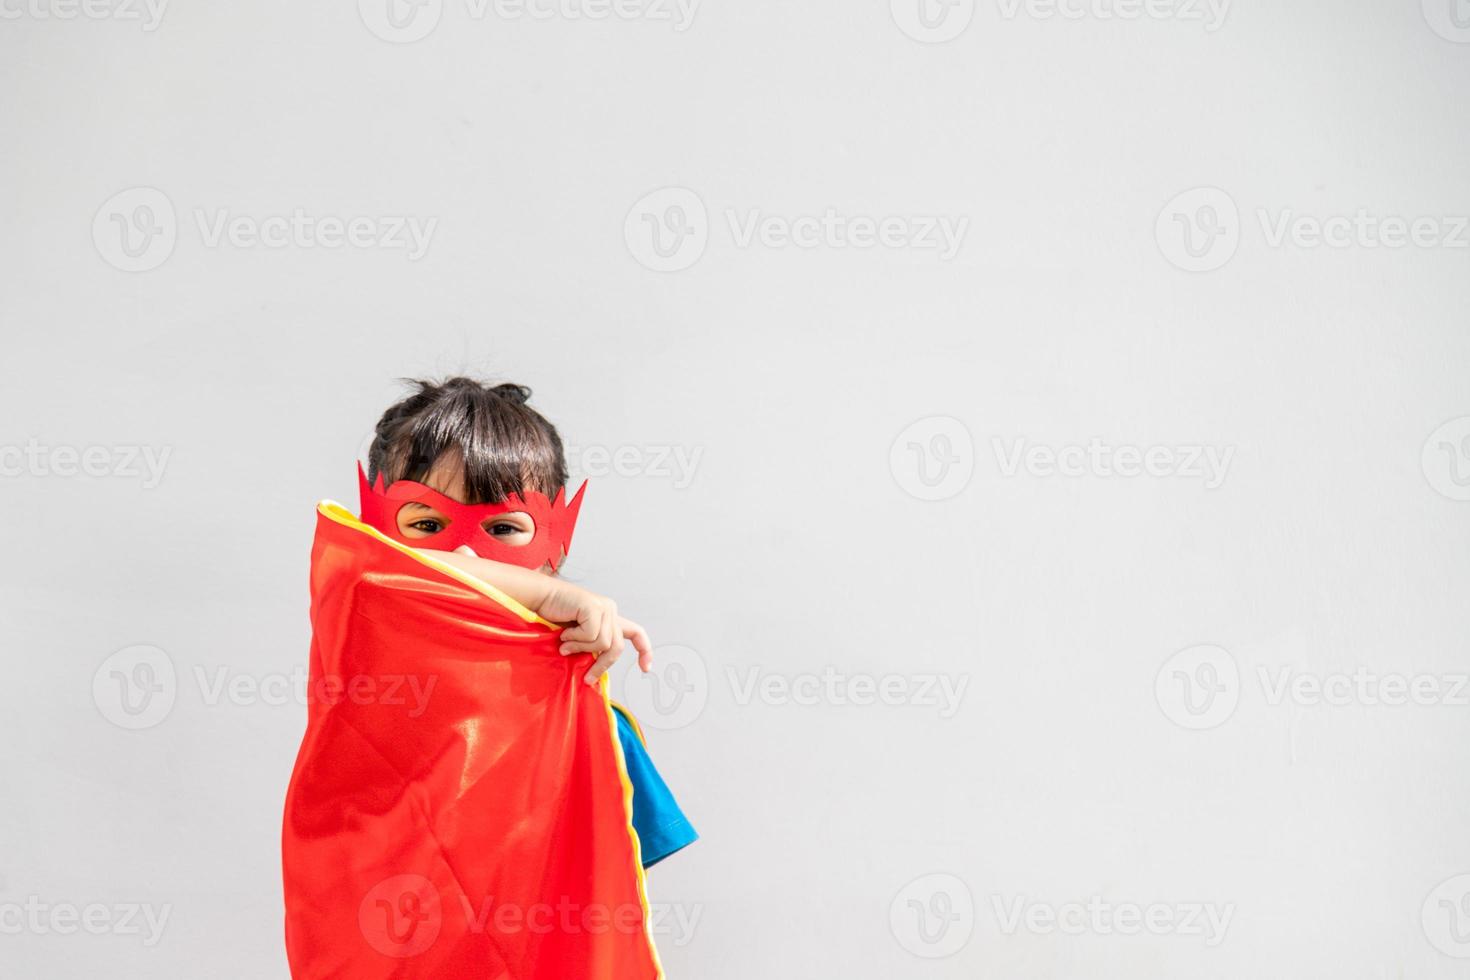 Kids concept, smiling girl playing super hero on white background photo